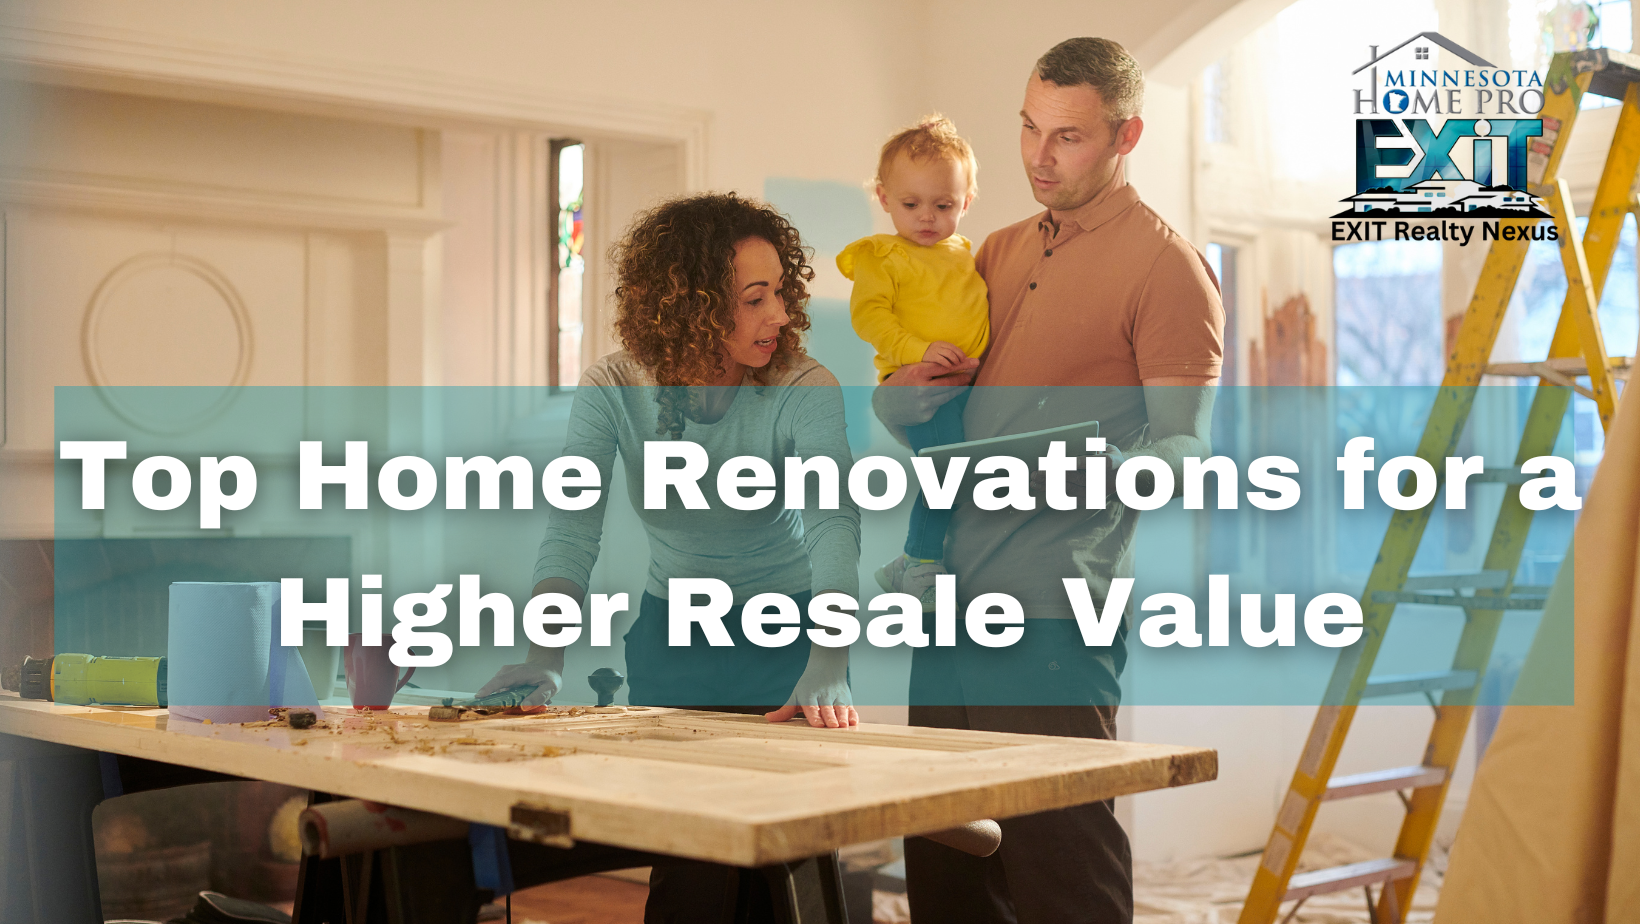 Top Home Renovations for a Higher Resale Value